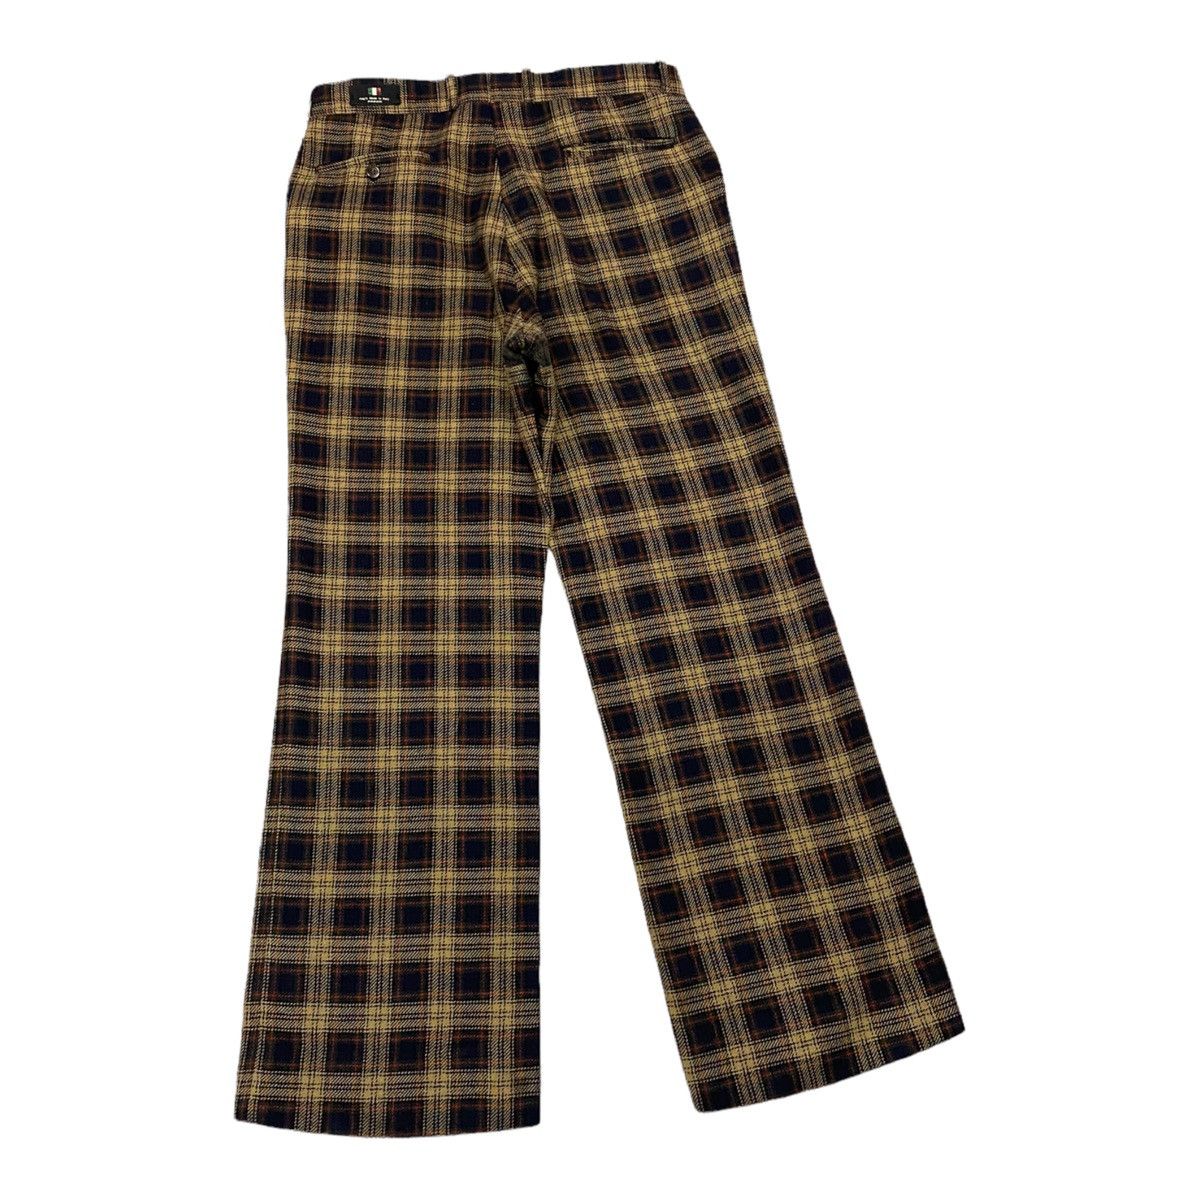 Archival Clothing - 🔥FARAH AW1998 CHECKED PLAID WOOL PANTS MADE IN ITALY - 4